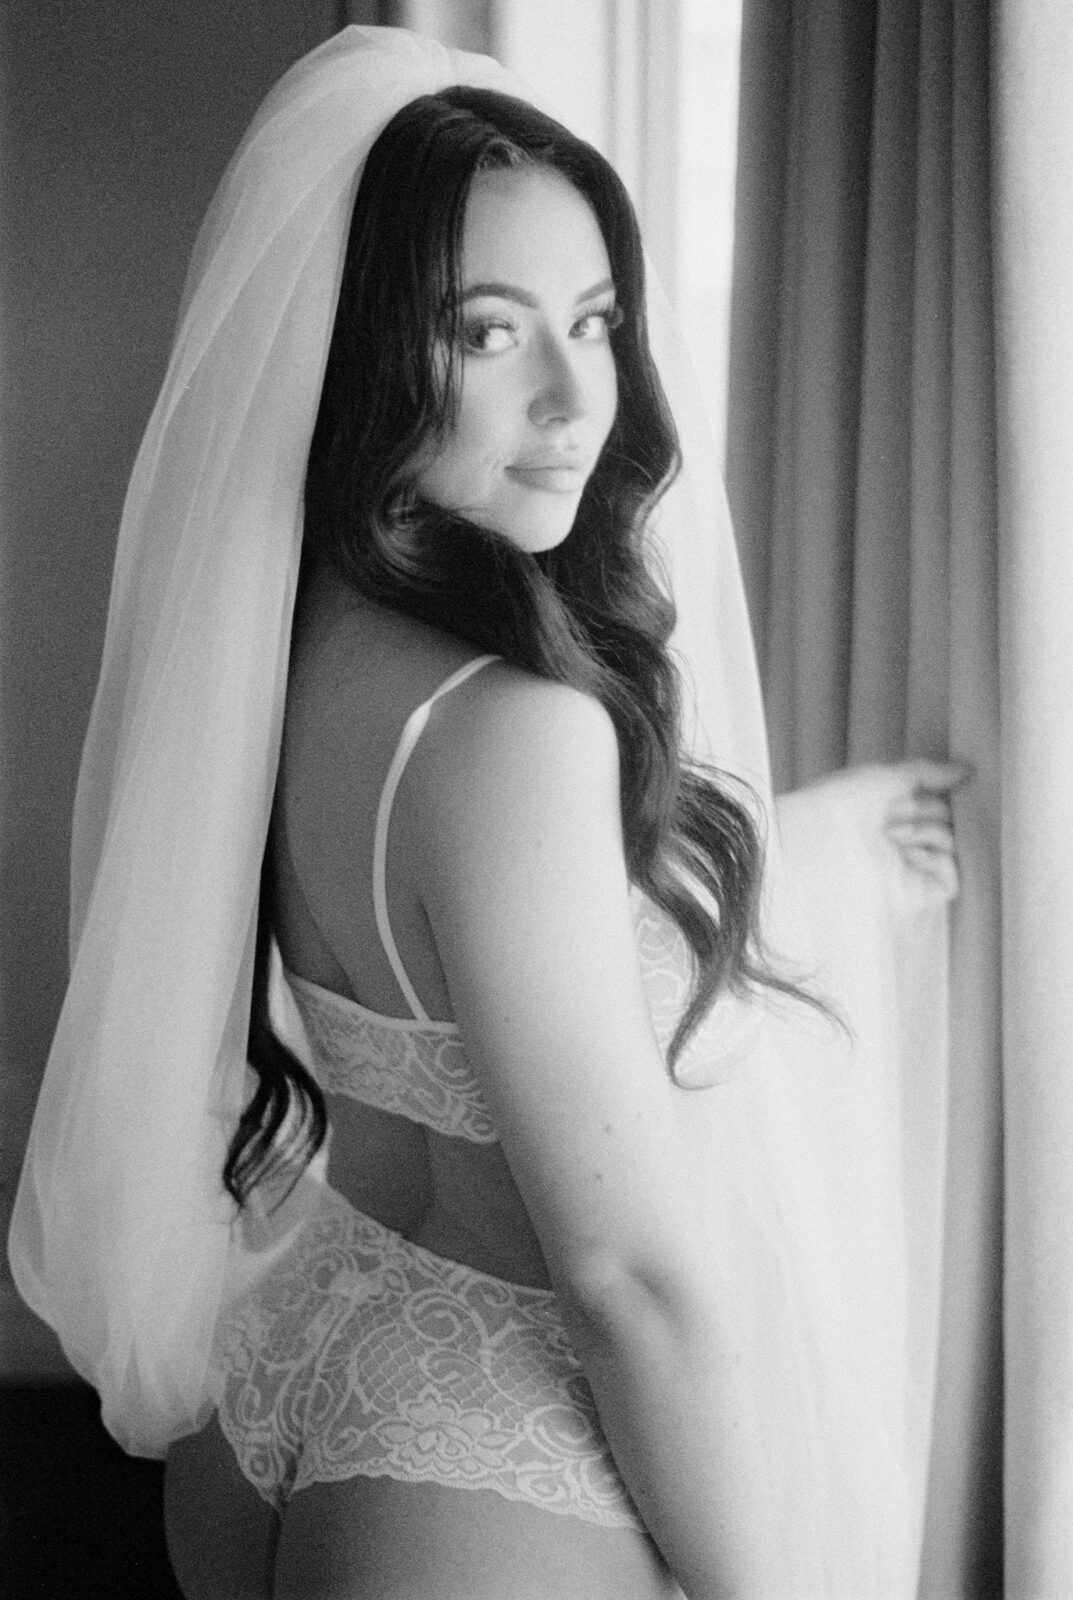 Elegant black and white bridal boudoir portraits, Intimate bridal photoshoot with bride wearing in white lingerie and veil